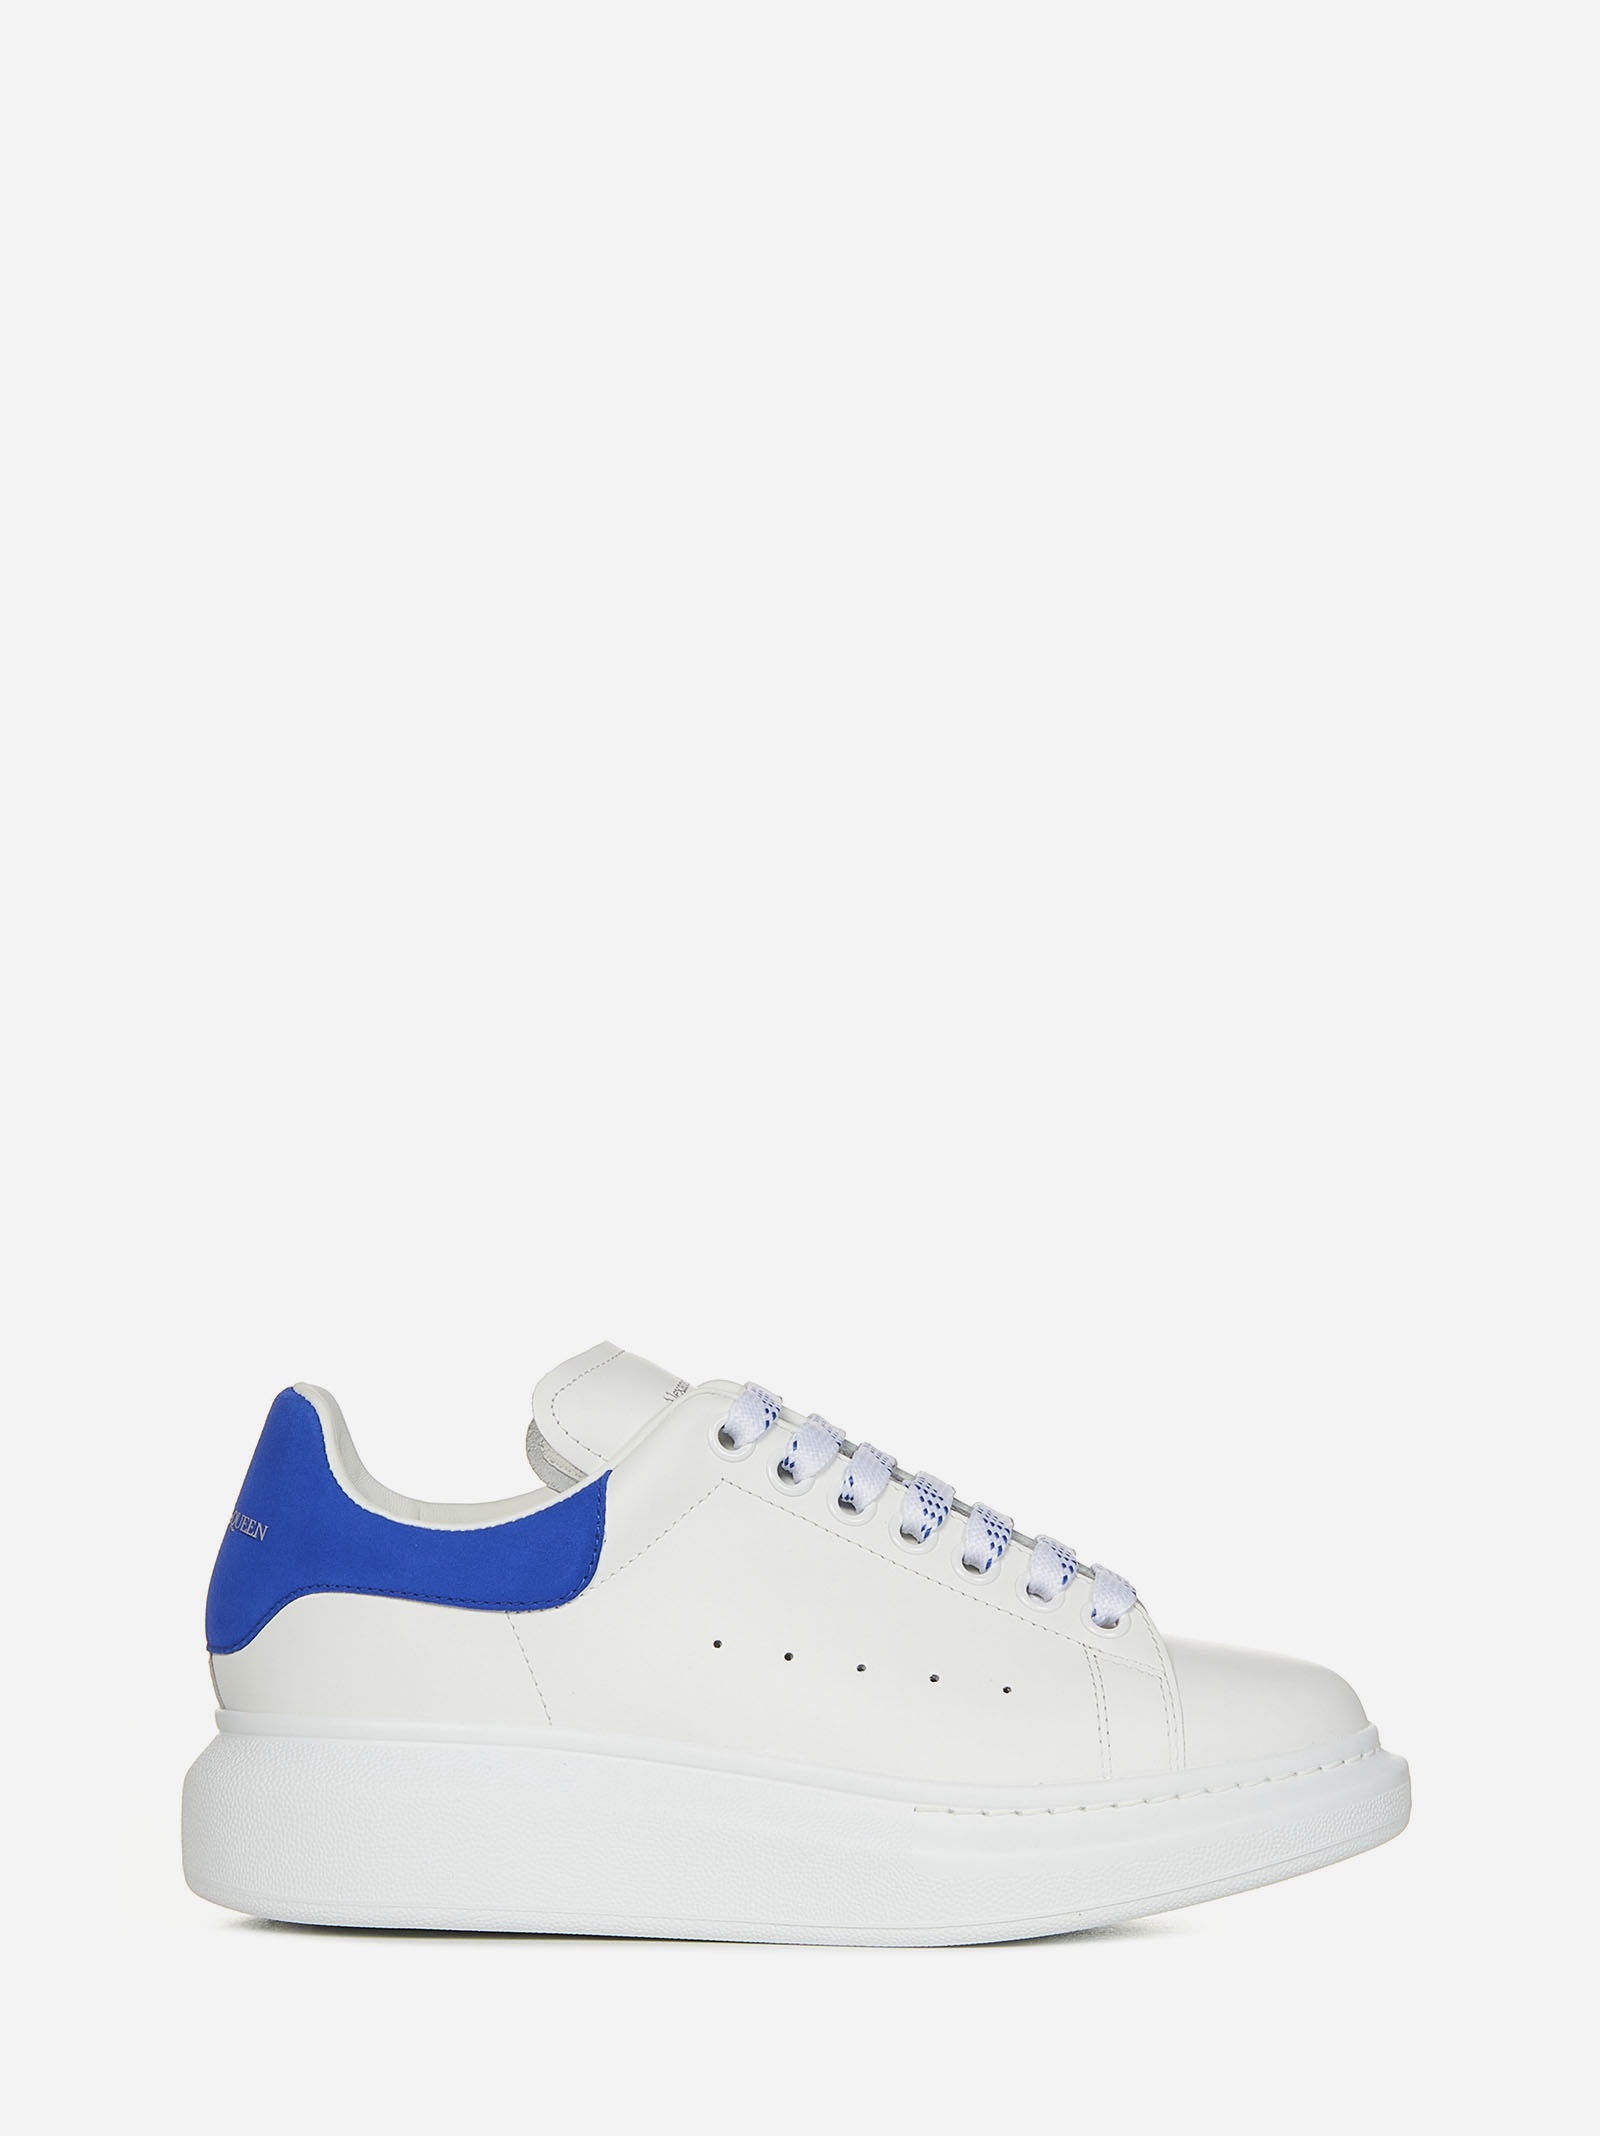 Oversize white smooth leather sneakers with electric blue suede detail on the heel. - 1